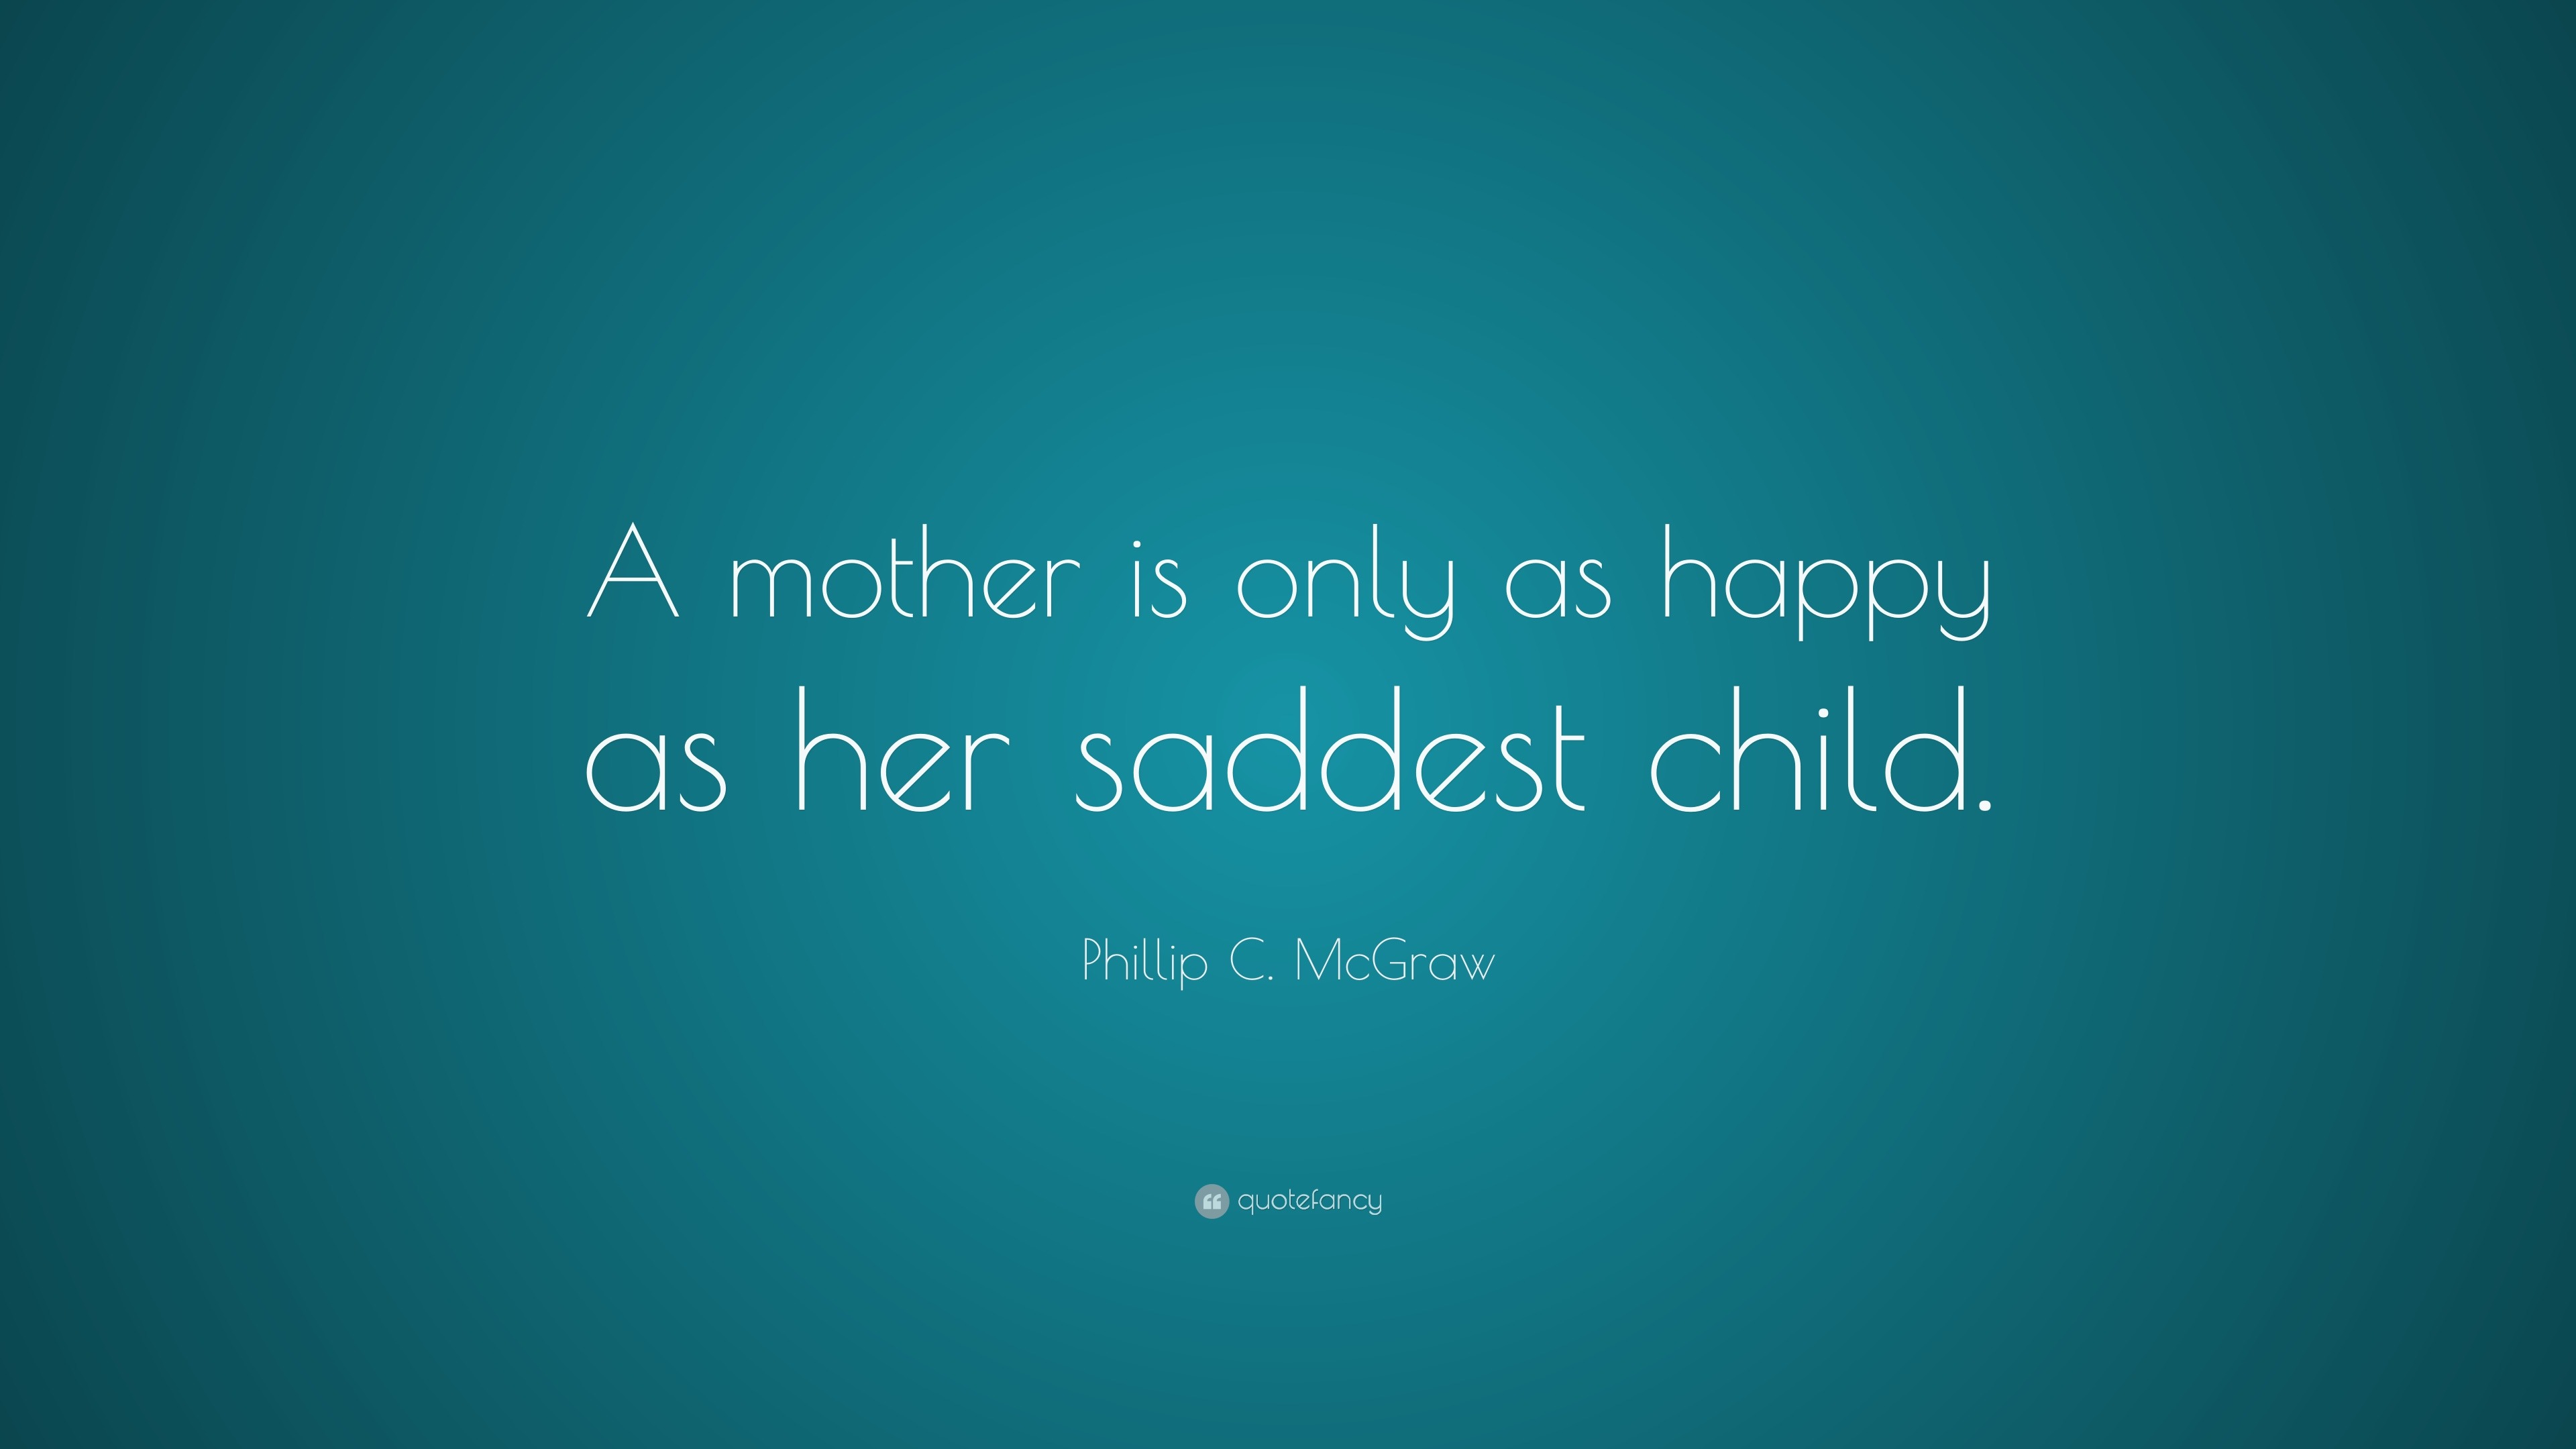 Phillip C. McGraw Quote: “A mother is only as happy as her saddest child.”